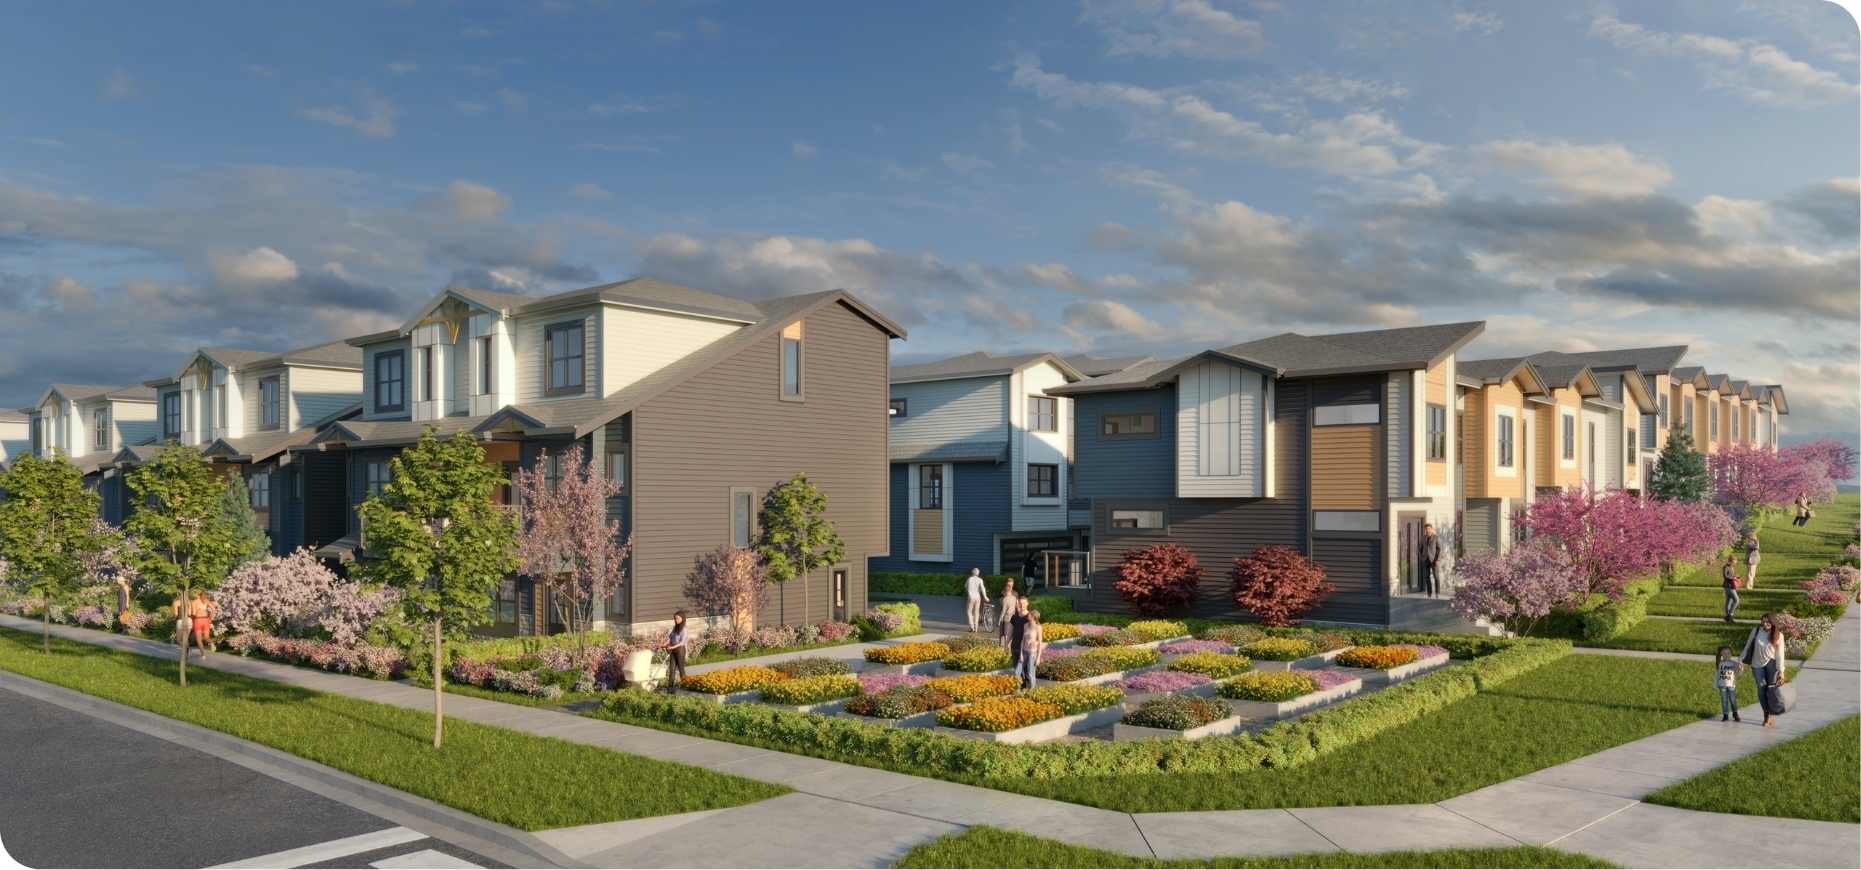 A residential community of 173 three-bedroom Surrey townhomes and duplexes.